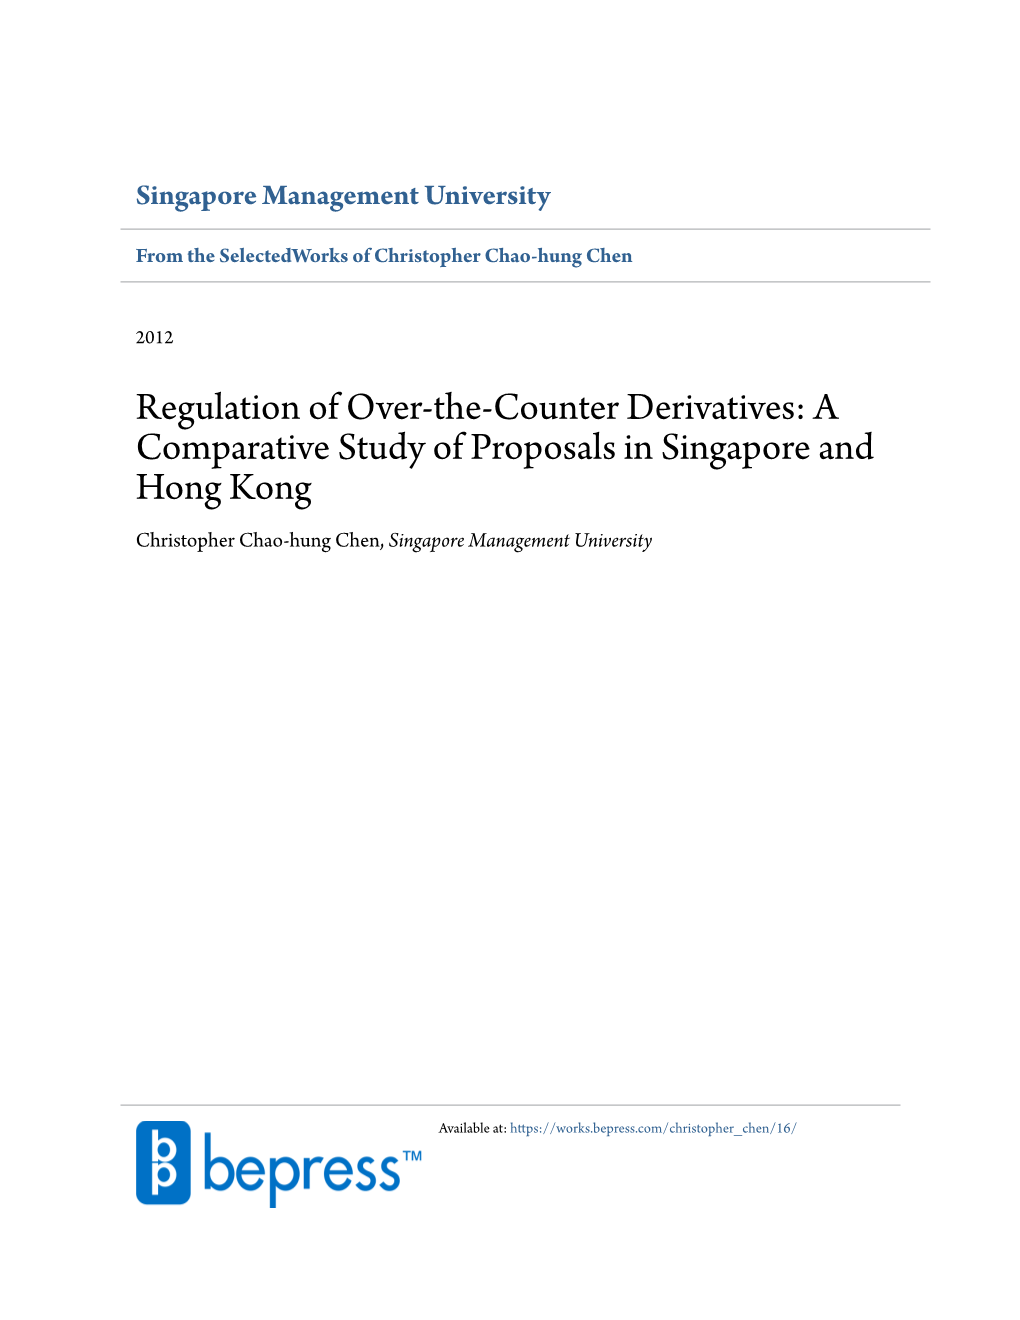 A Comparative Study of Proposals in Singapore and Hong Kong Christopher Chao-Hung Chen, Singapore Management University